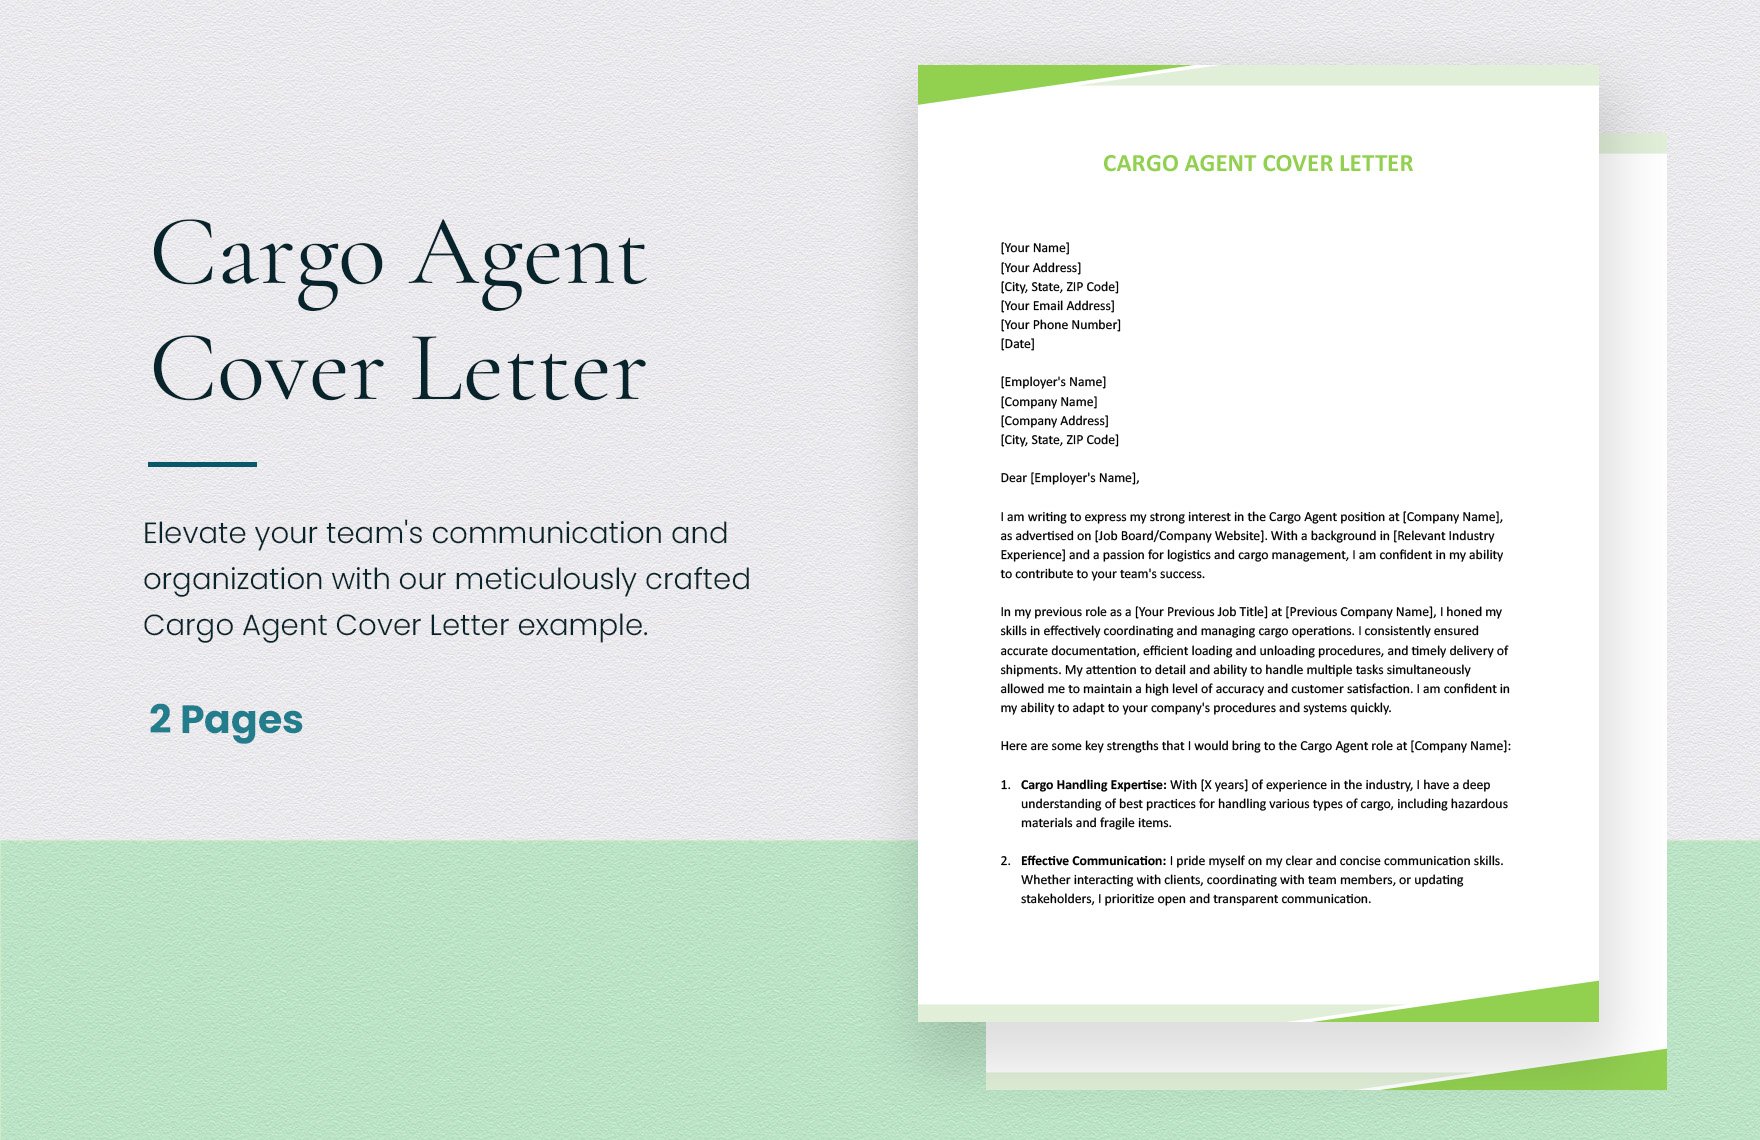 Cargo Agent Cover Letter in Word, Google Docs, Apple Pages